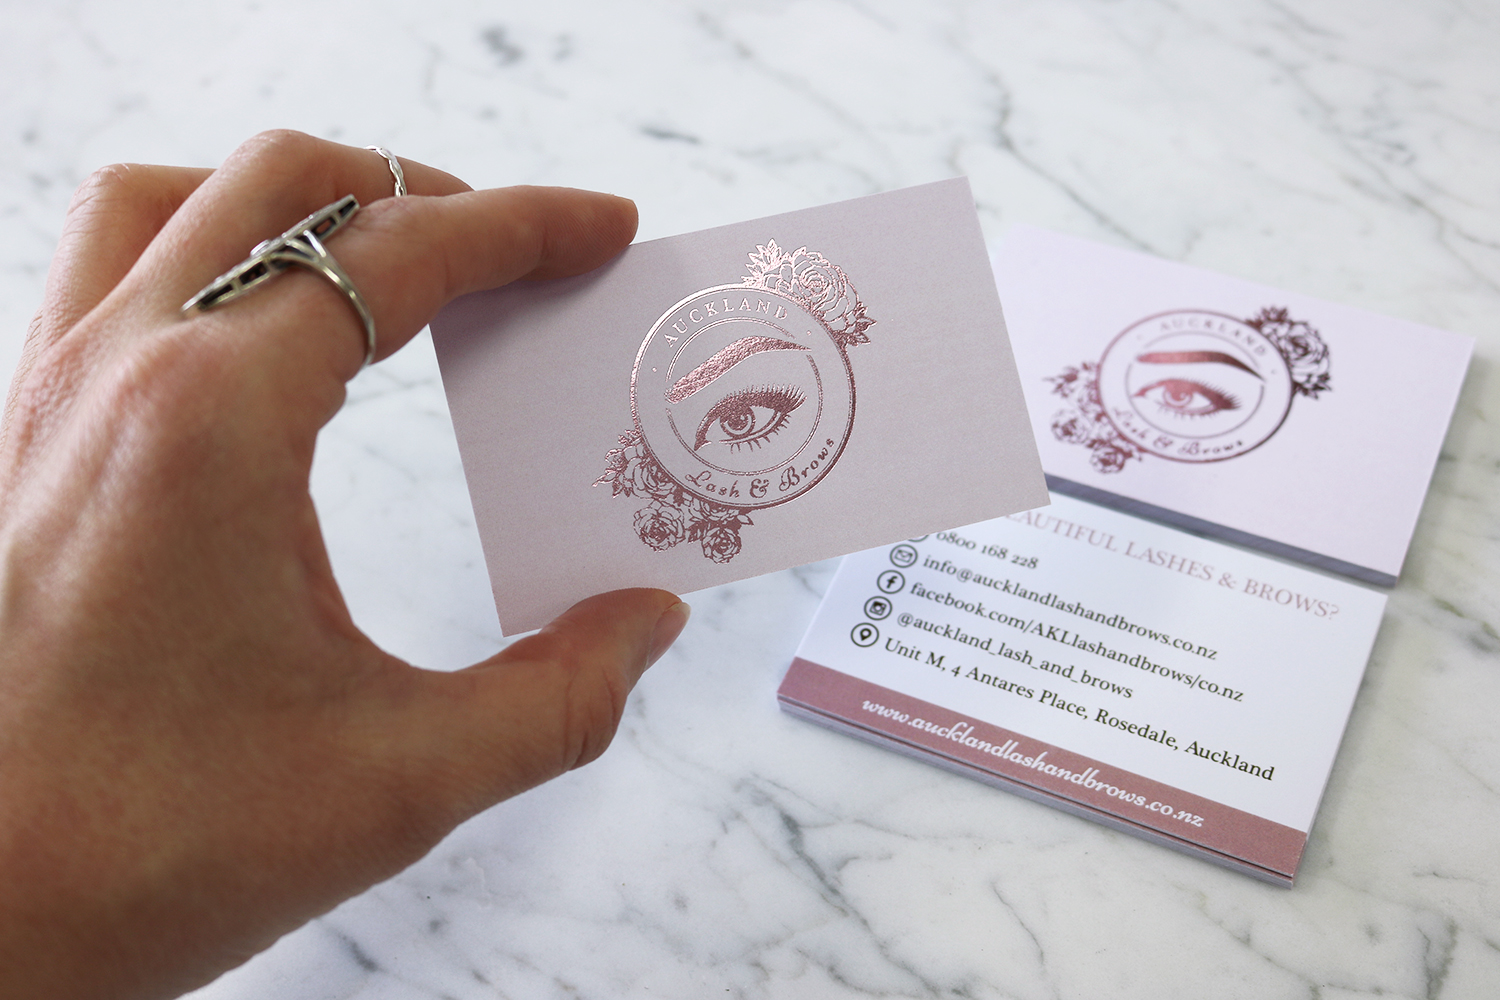 Auckland Lash & Brows Business Cards